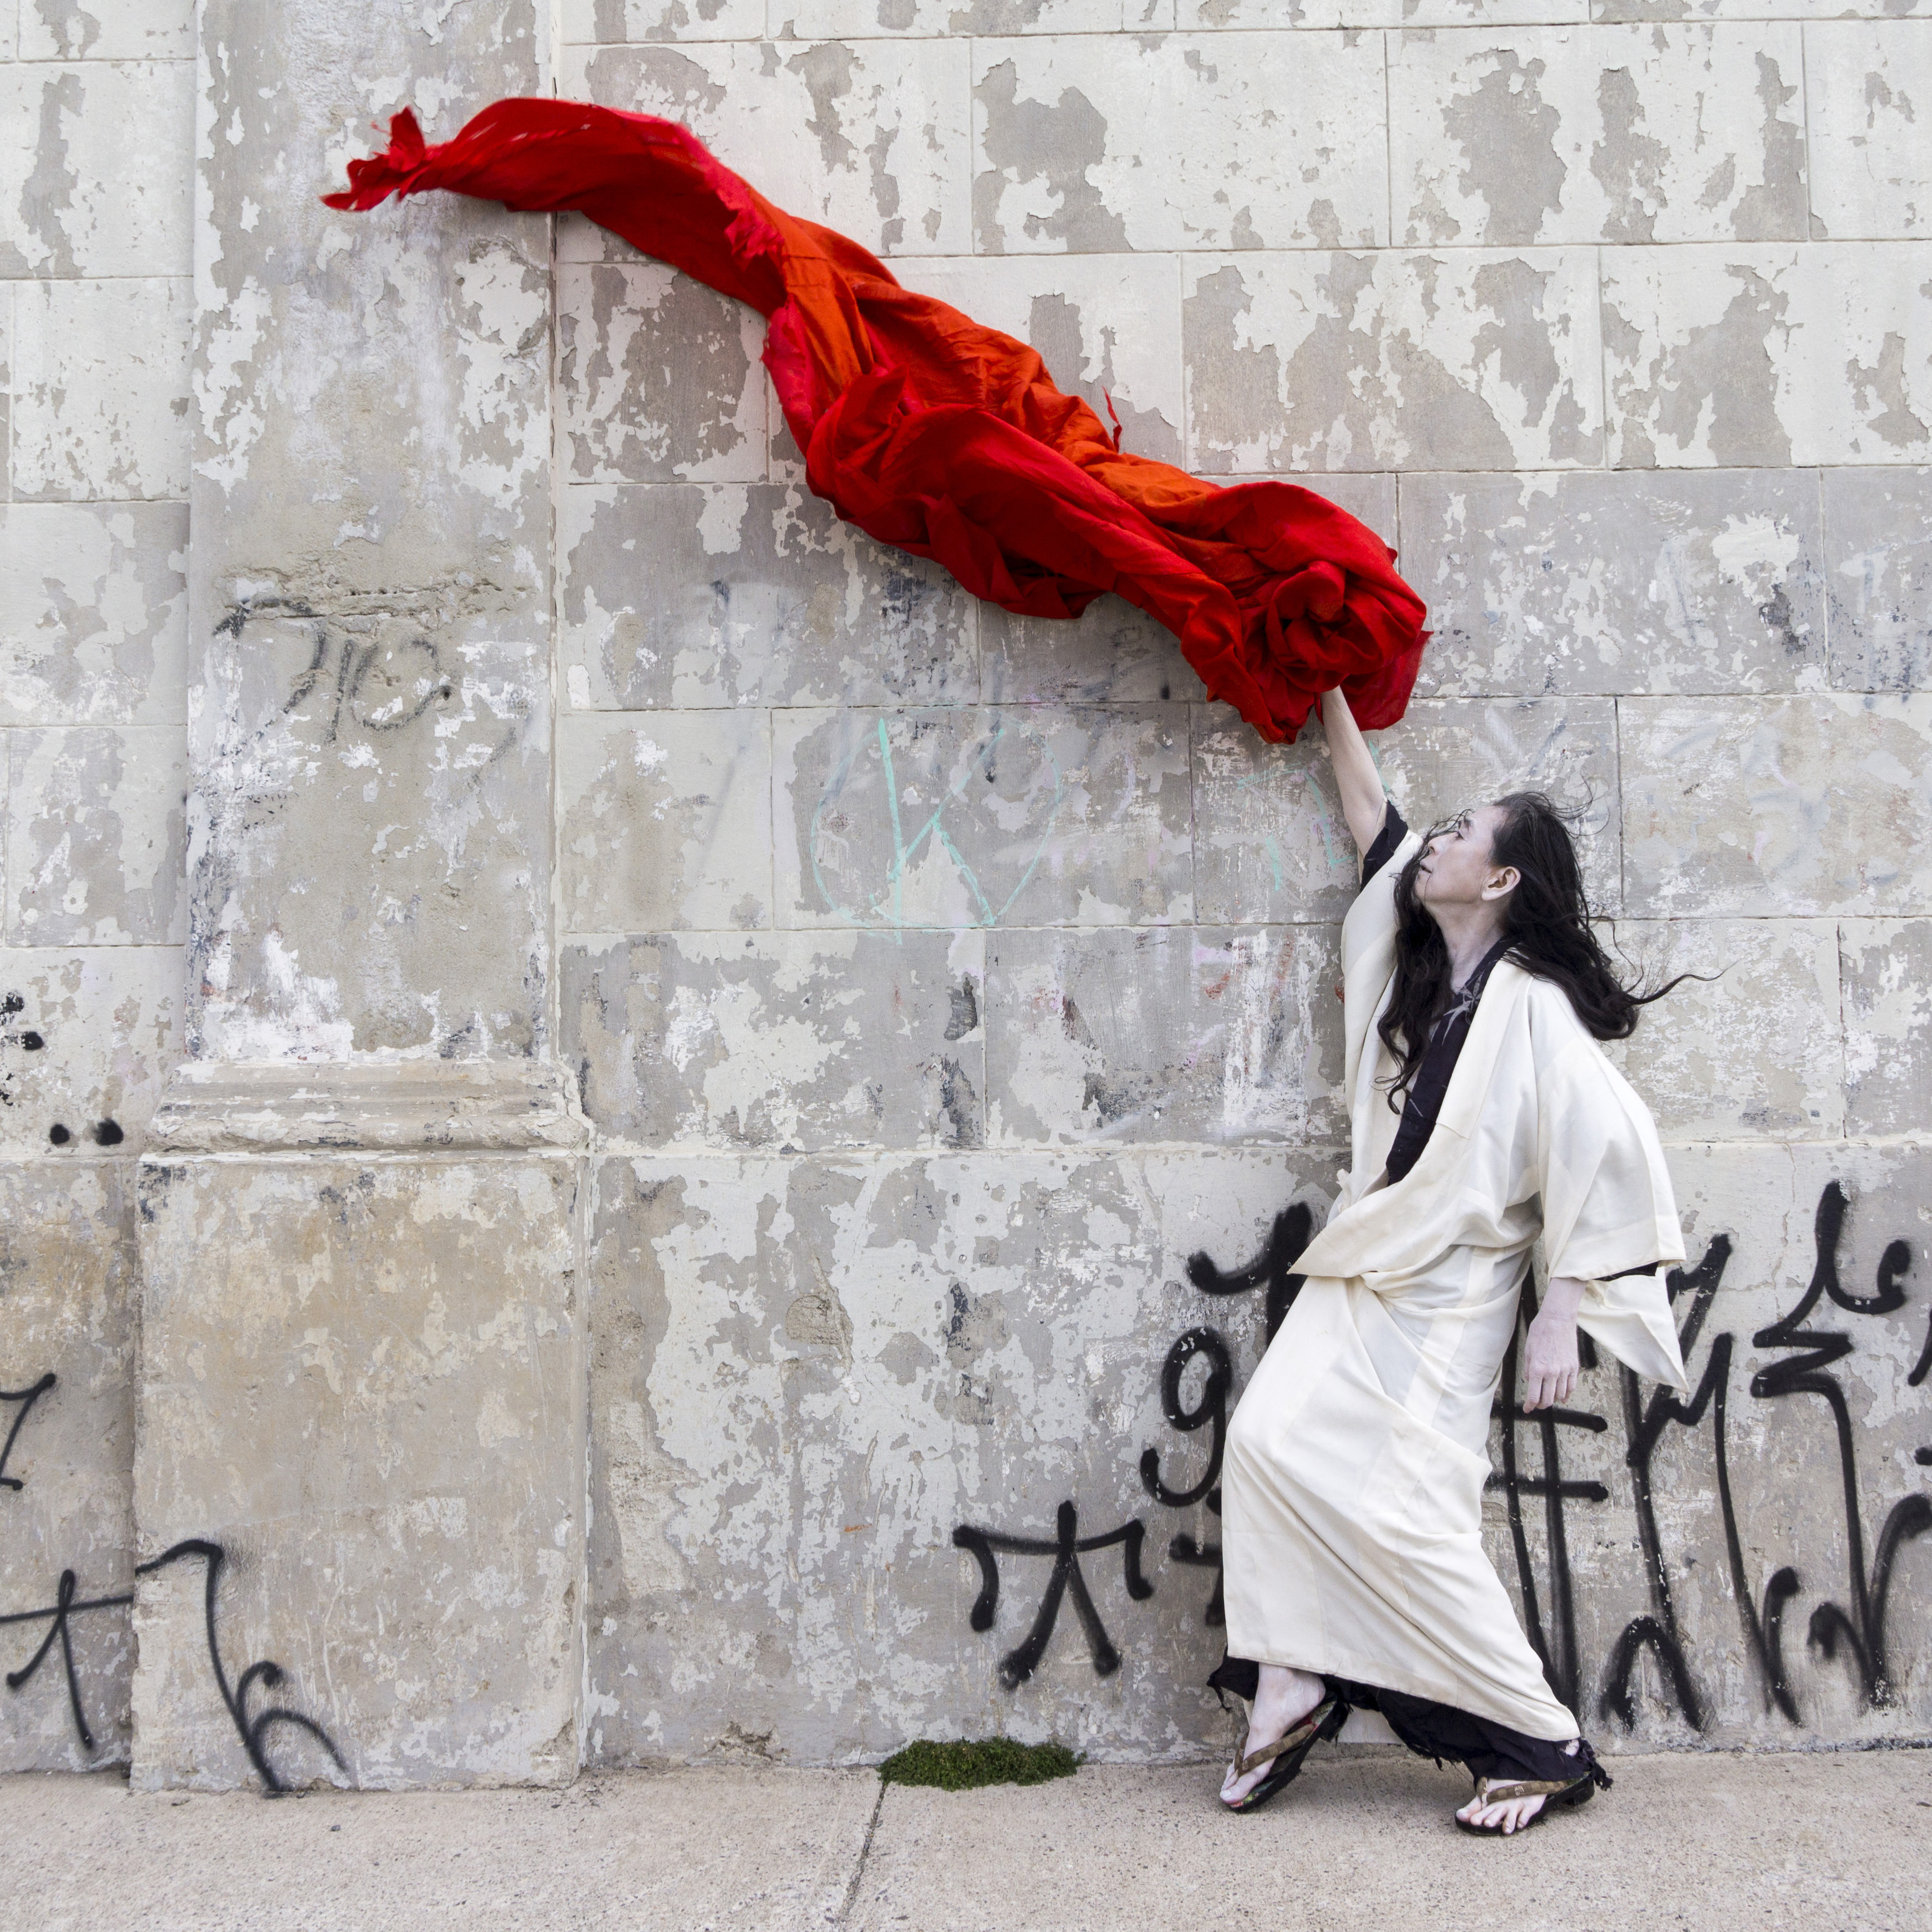 A japanese woman, slim and lithe, poses lyrically in front of an urban cement wall with a bright red textile